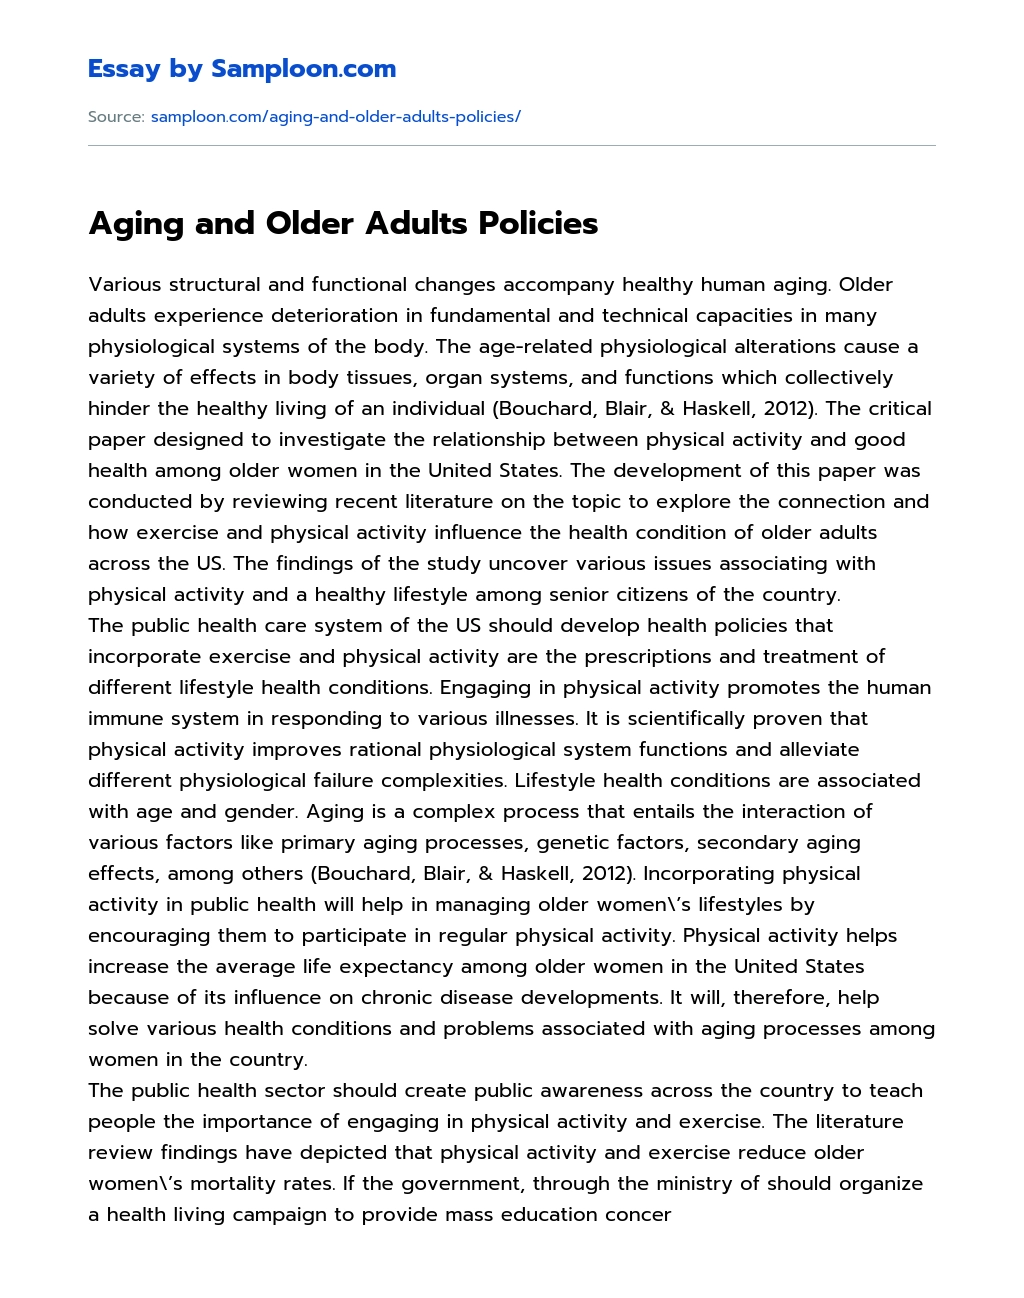 Aging and Older Adults Policies essay